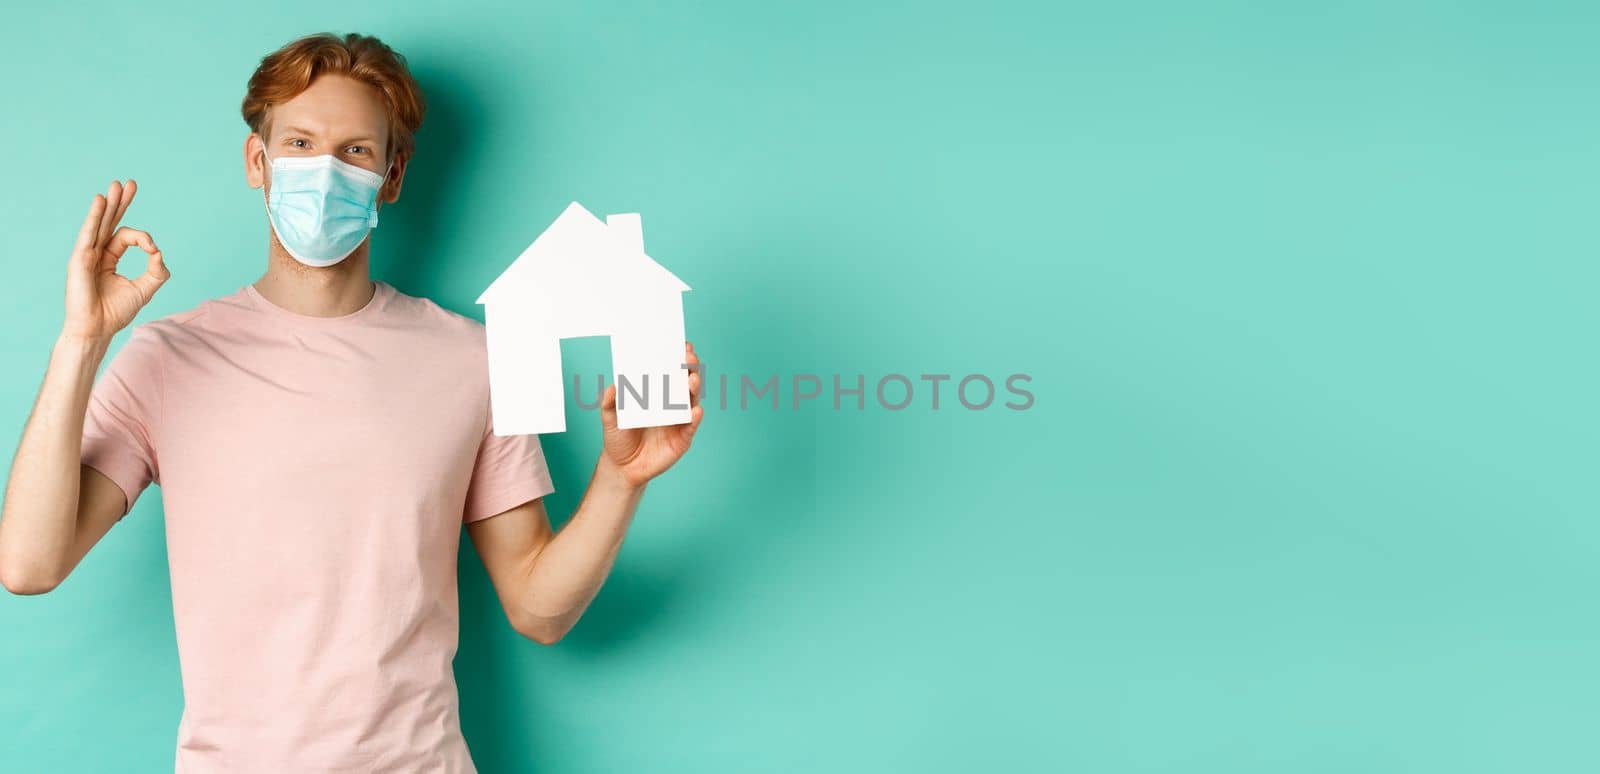 Covid-19 and real estate concept. Cheerful guy in face mask showing house cutout and okay sign, standing over turquoise background.